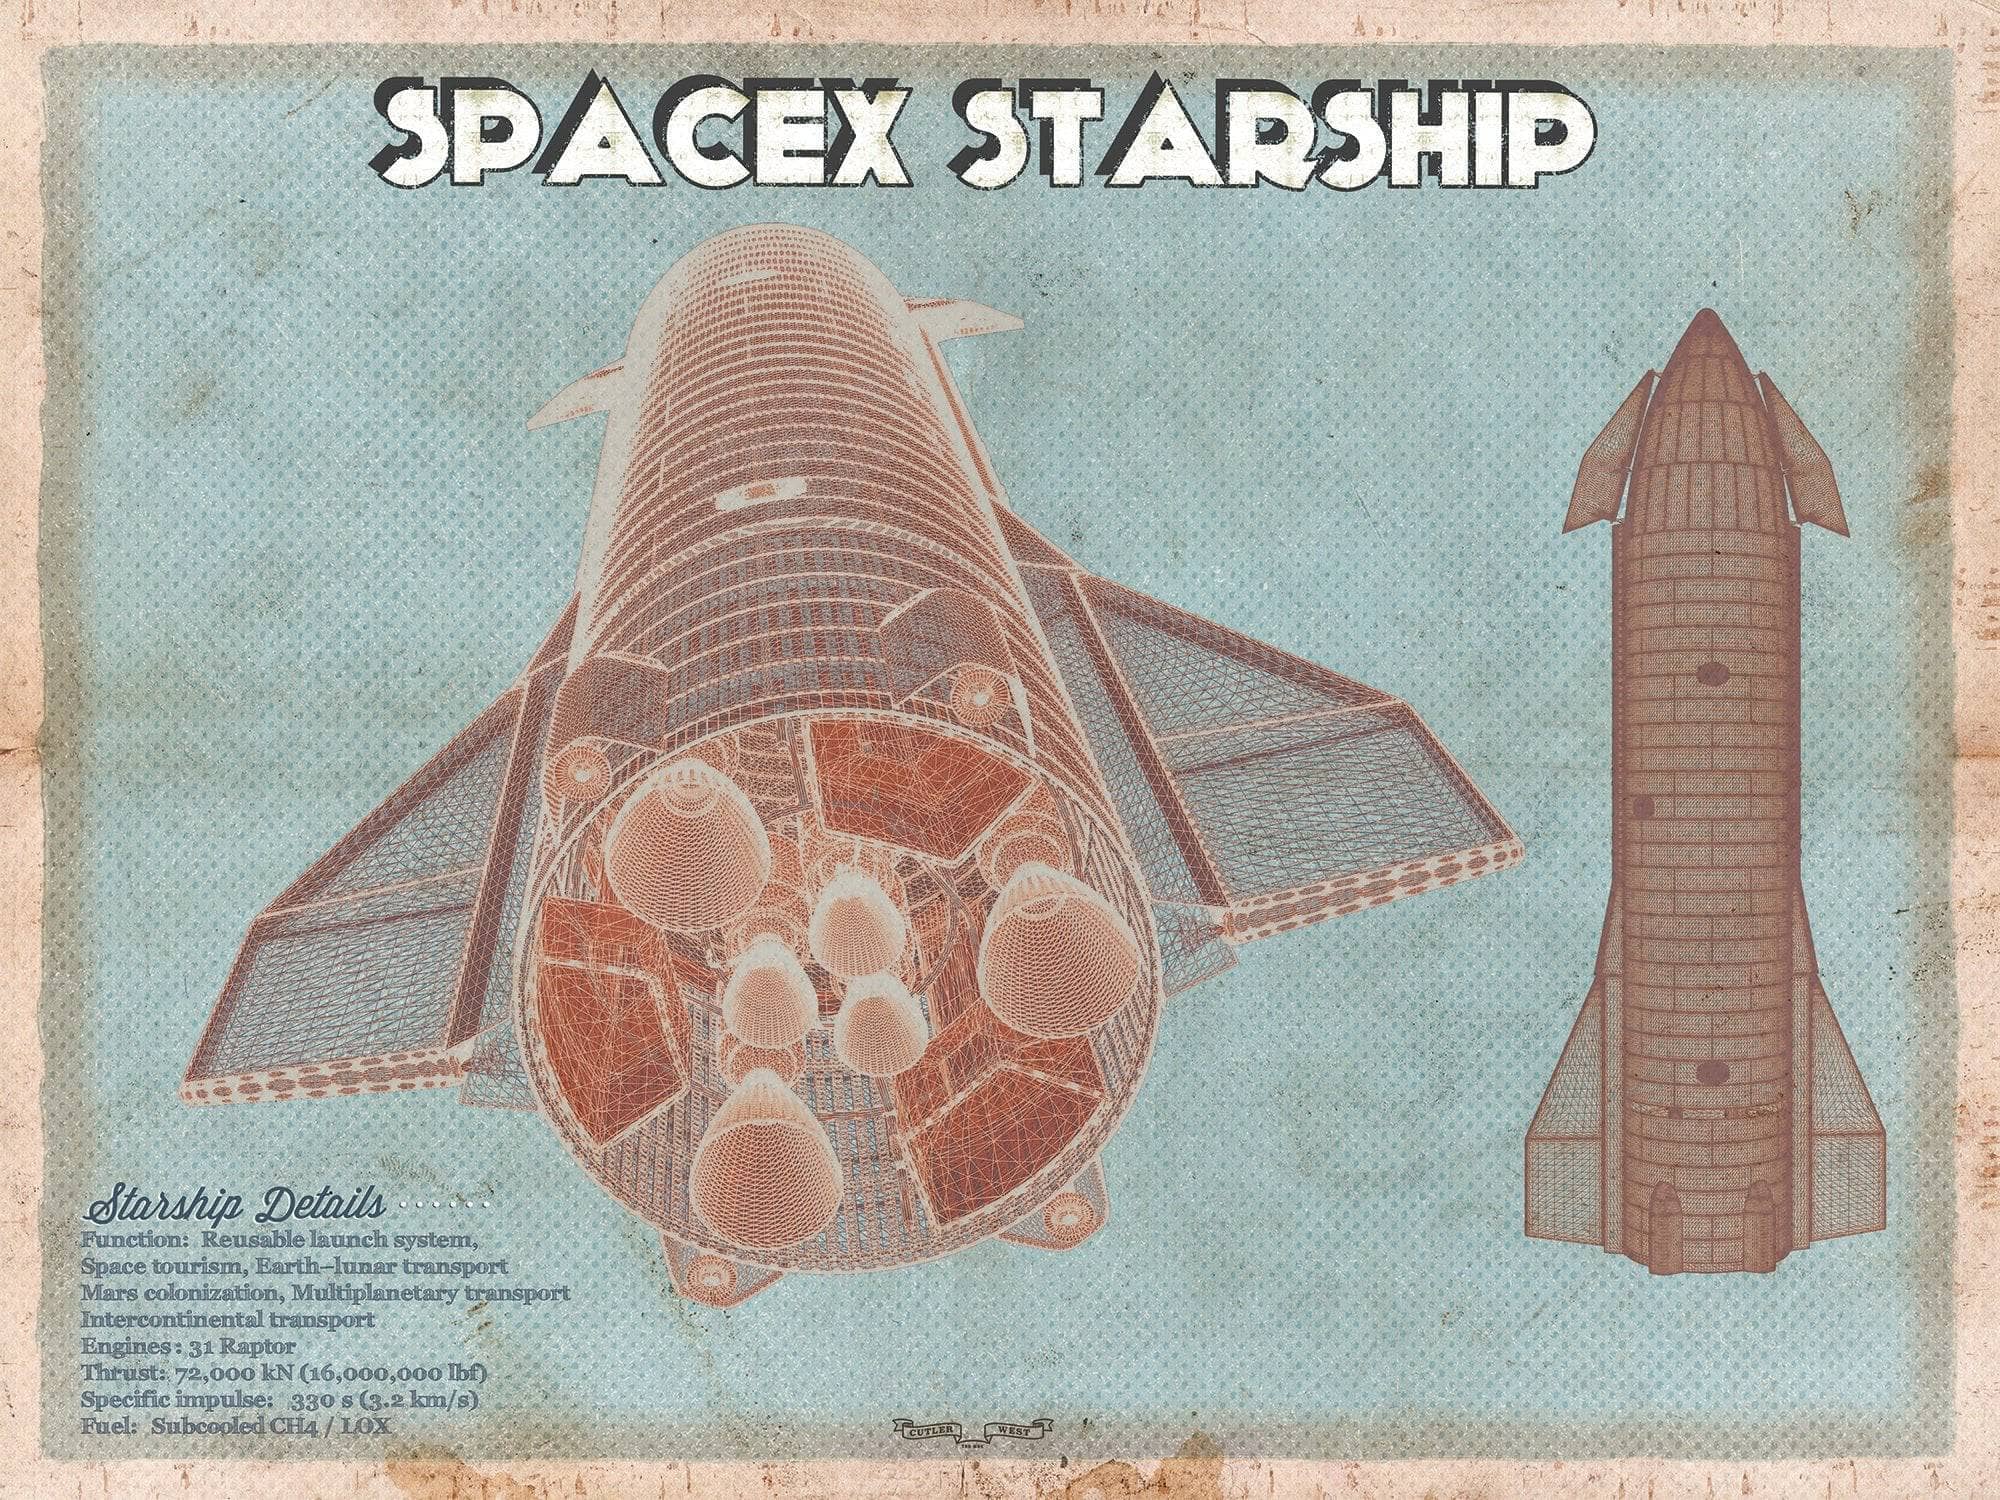 Cutler West SciFi, Fantasy, and Space SpaceX Starship Vintage Space Exploration Print